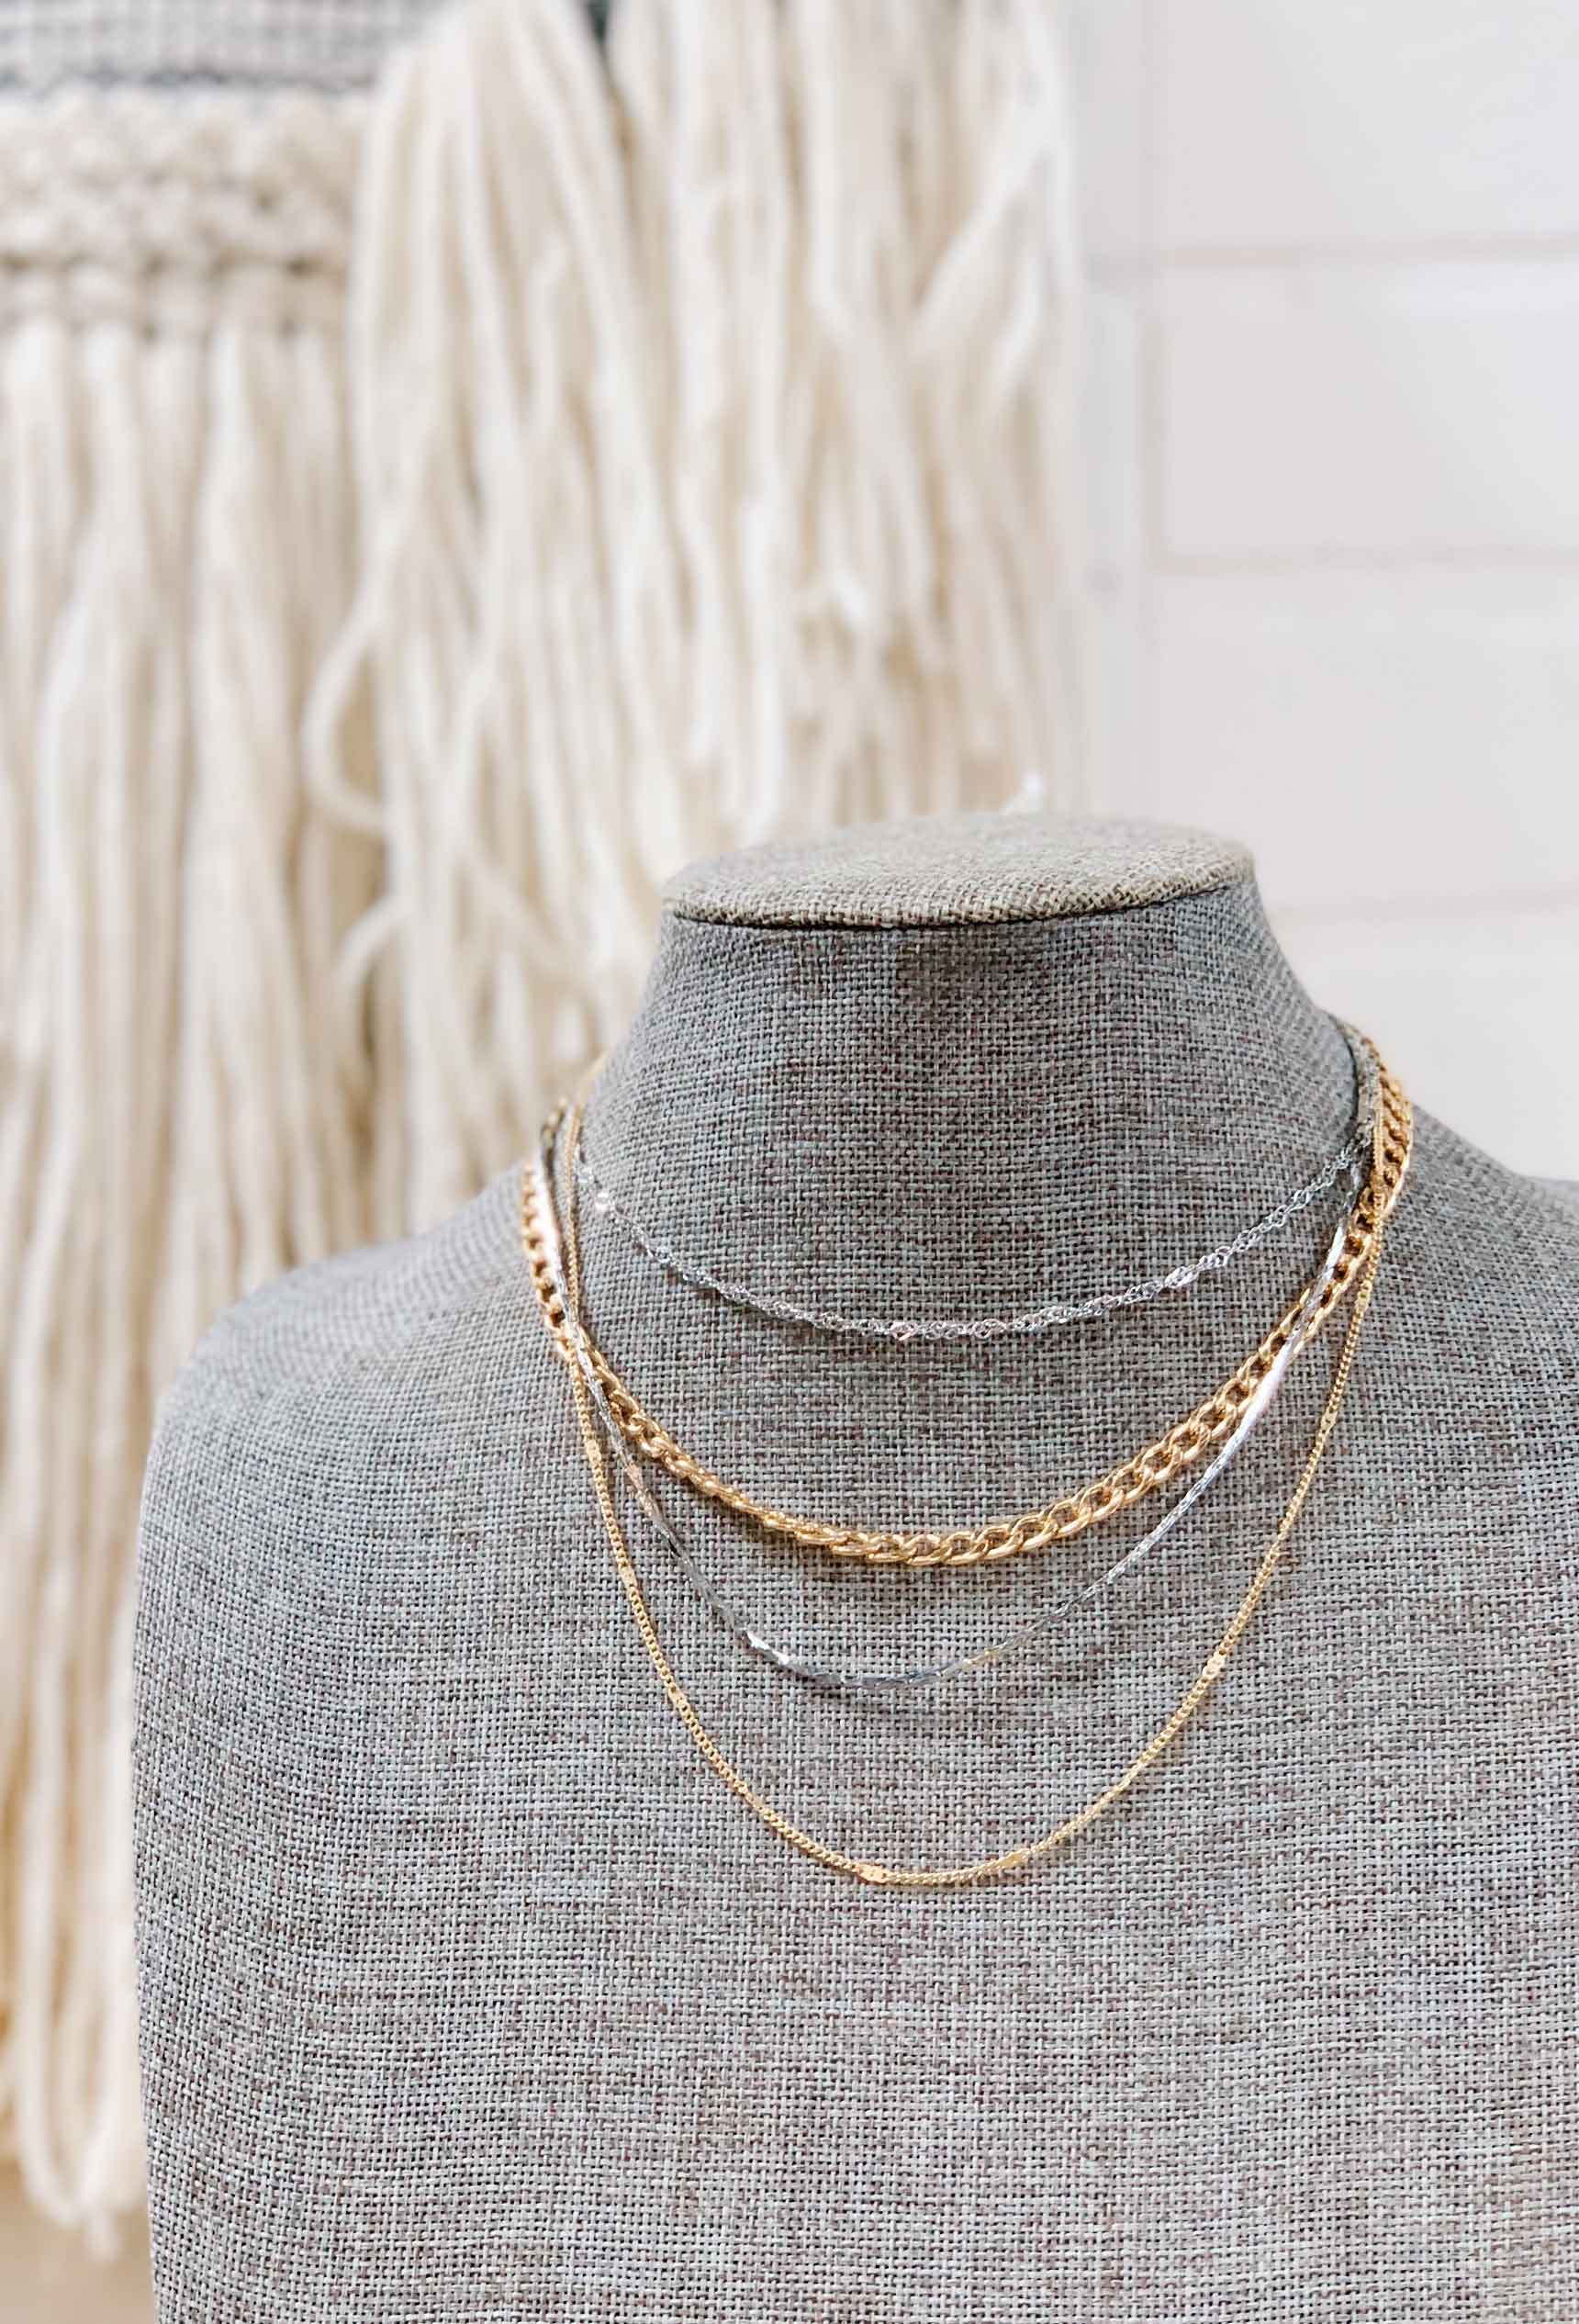 Gold & Silver Multi-Layer Necklace | Groovy\'s | Chain Link | 4 Layers